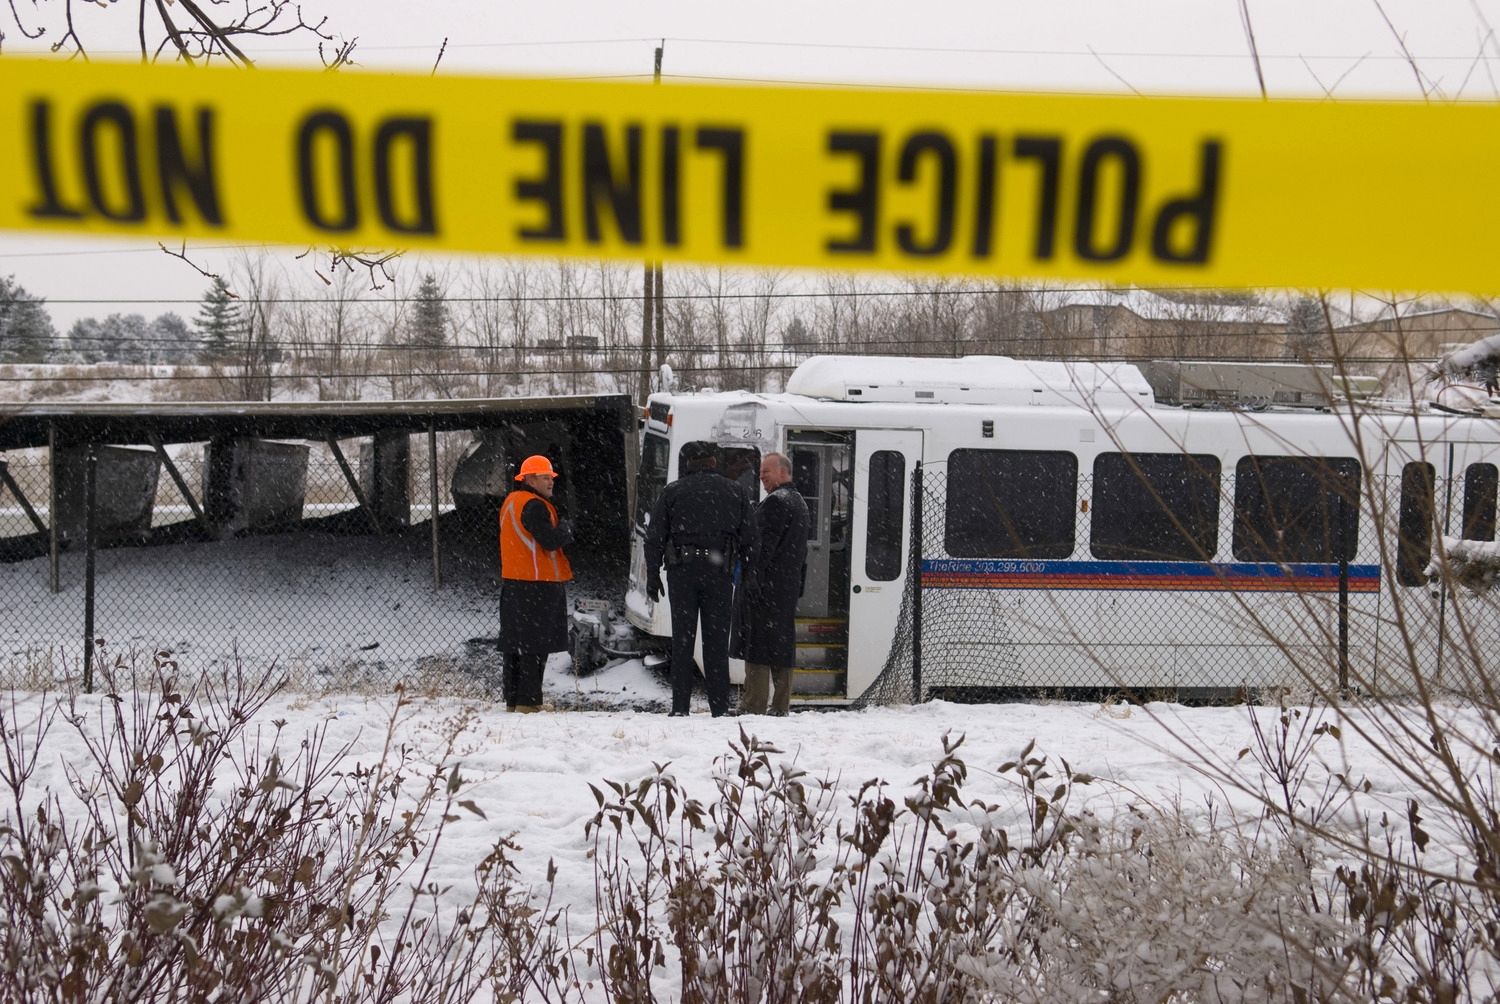  Littleton Police investigators and Union Pacific workers survey the carnage after an RTD light rail train collided with an overturned Union Pacific coal train in Littleton on 11 December 2007. 